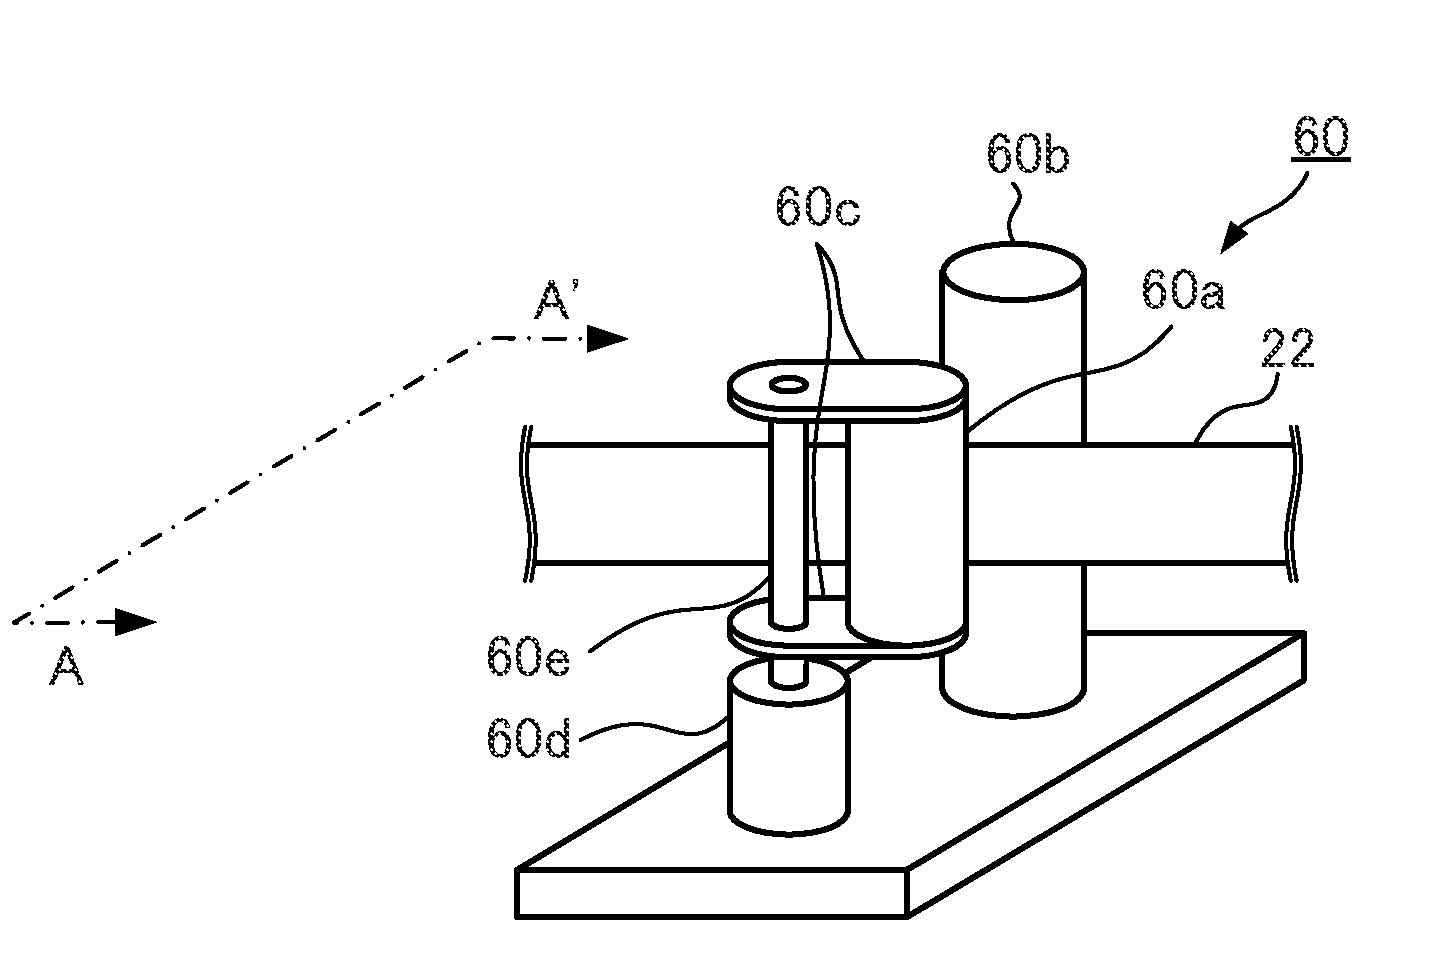 Blood Feeding Flow Rate-Controlling Device and Extracorporeal Circulation Device